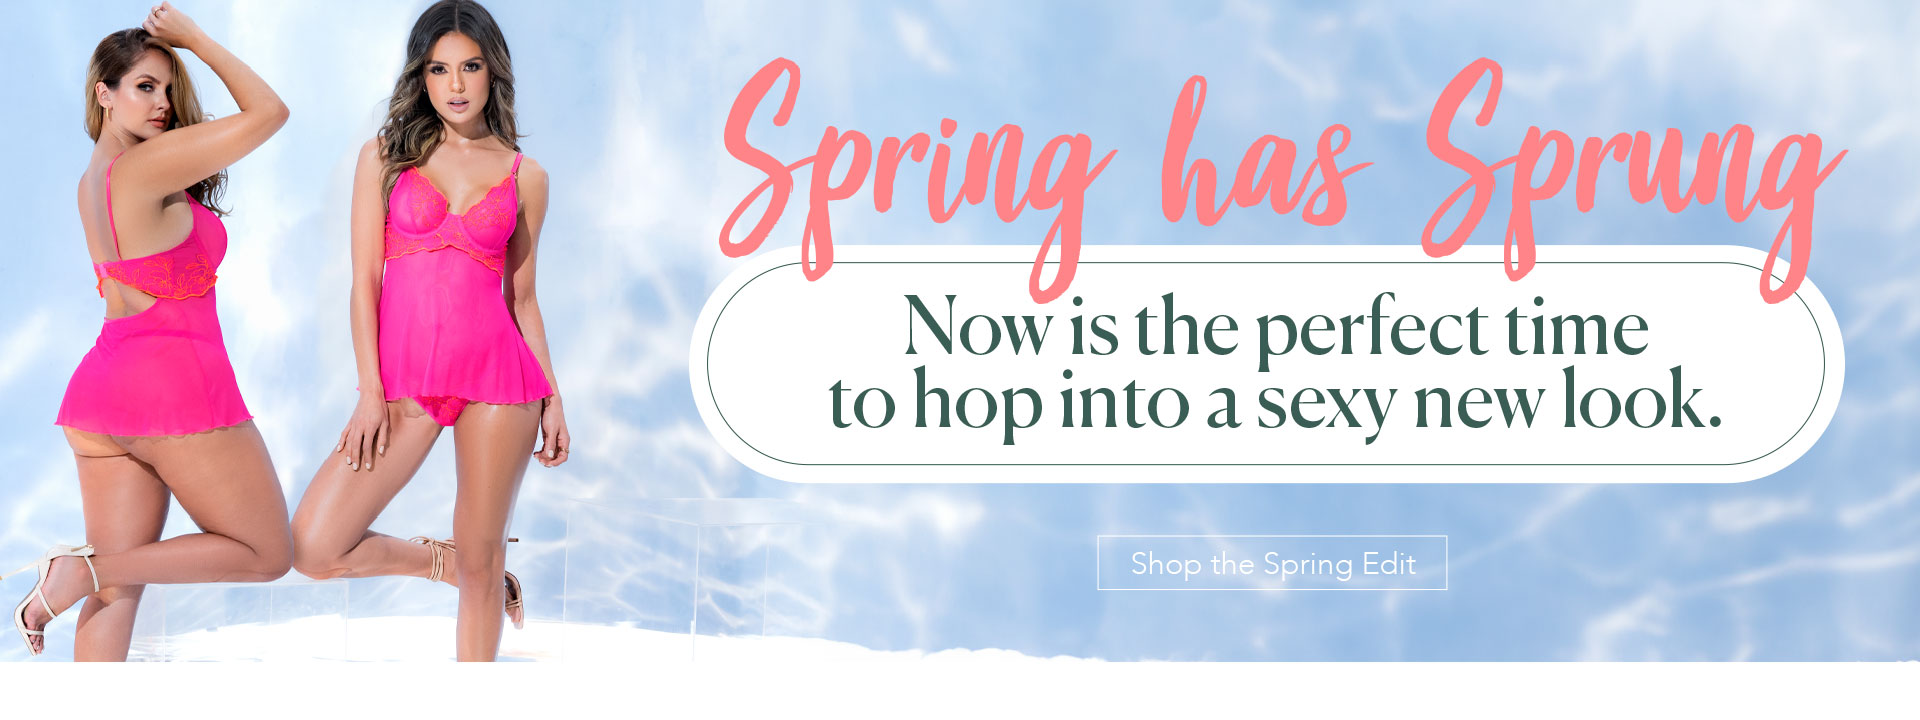 Spring has Sprung - Now is the perfect time to hop into a sexy new look. - Shop the Spring Edit